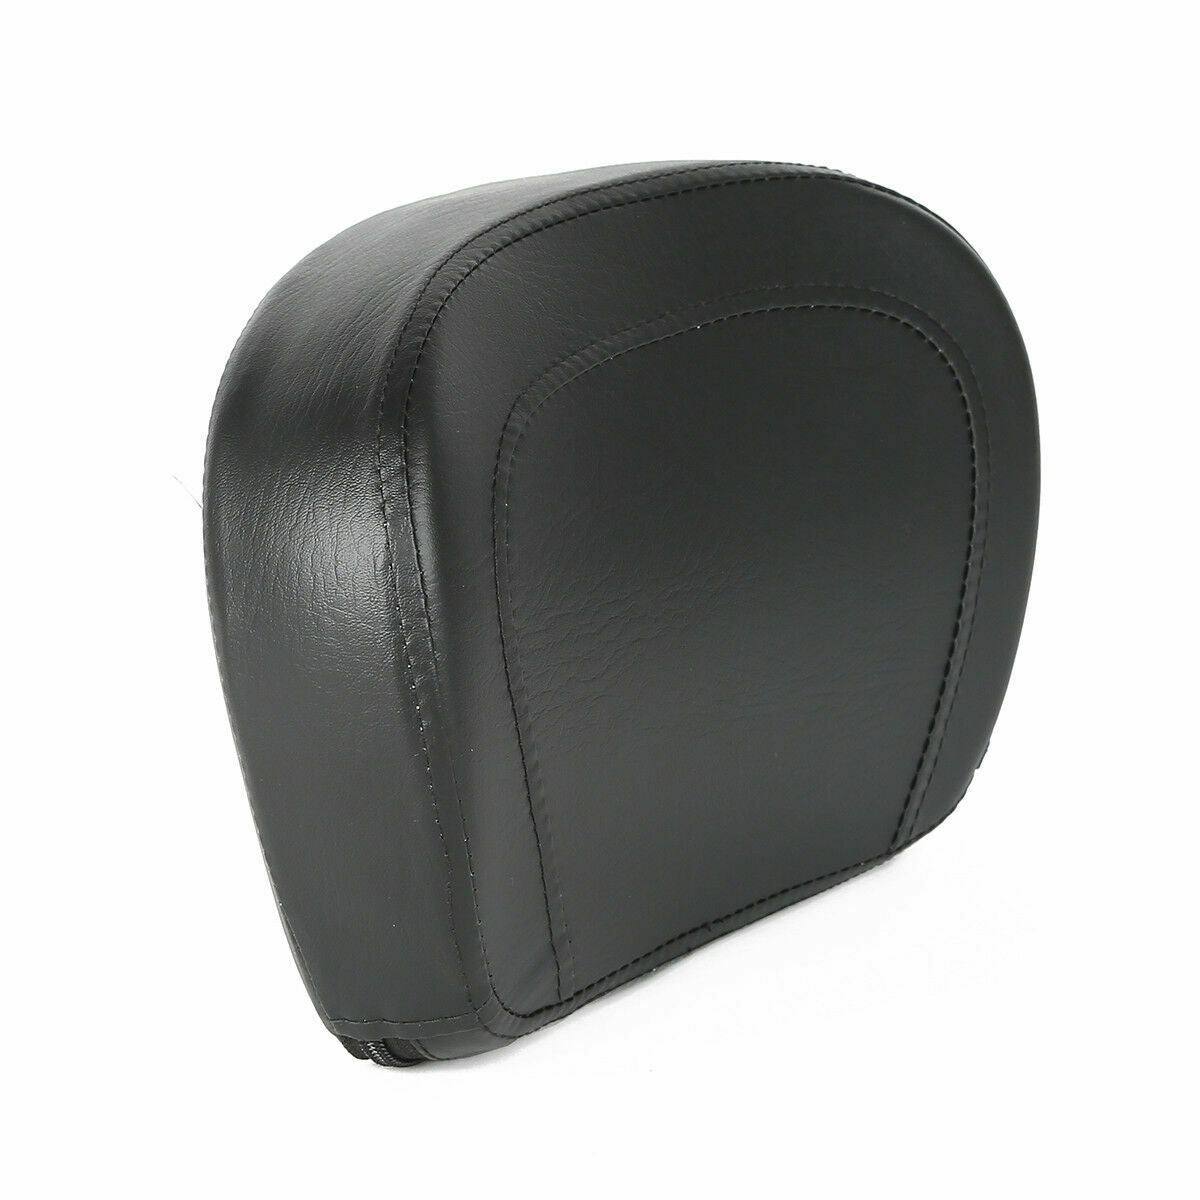 Sissy Bar Passenger Backrest Pad For Harley Touring Road King Street Glide 97-22 - Moto Life Products